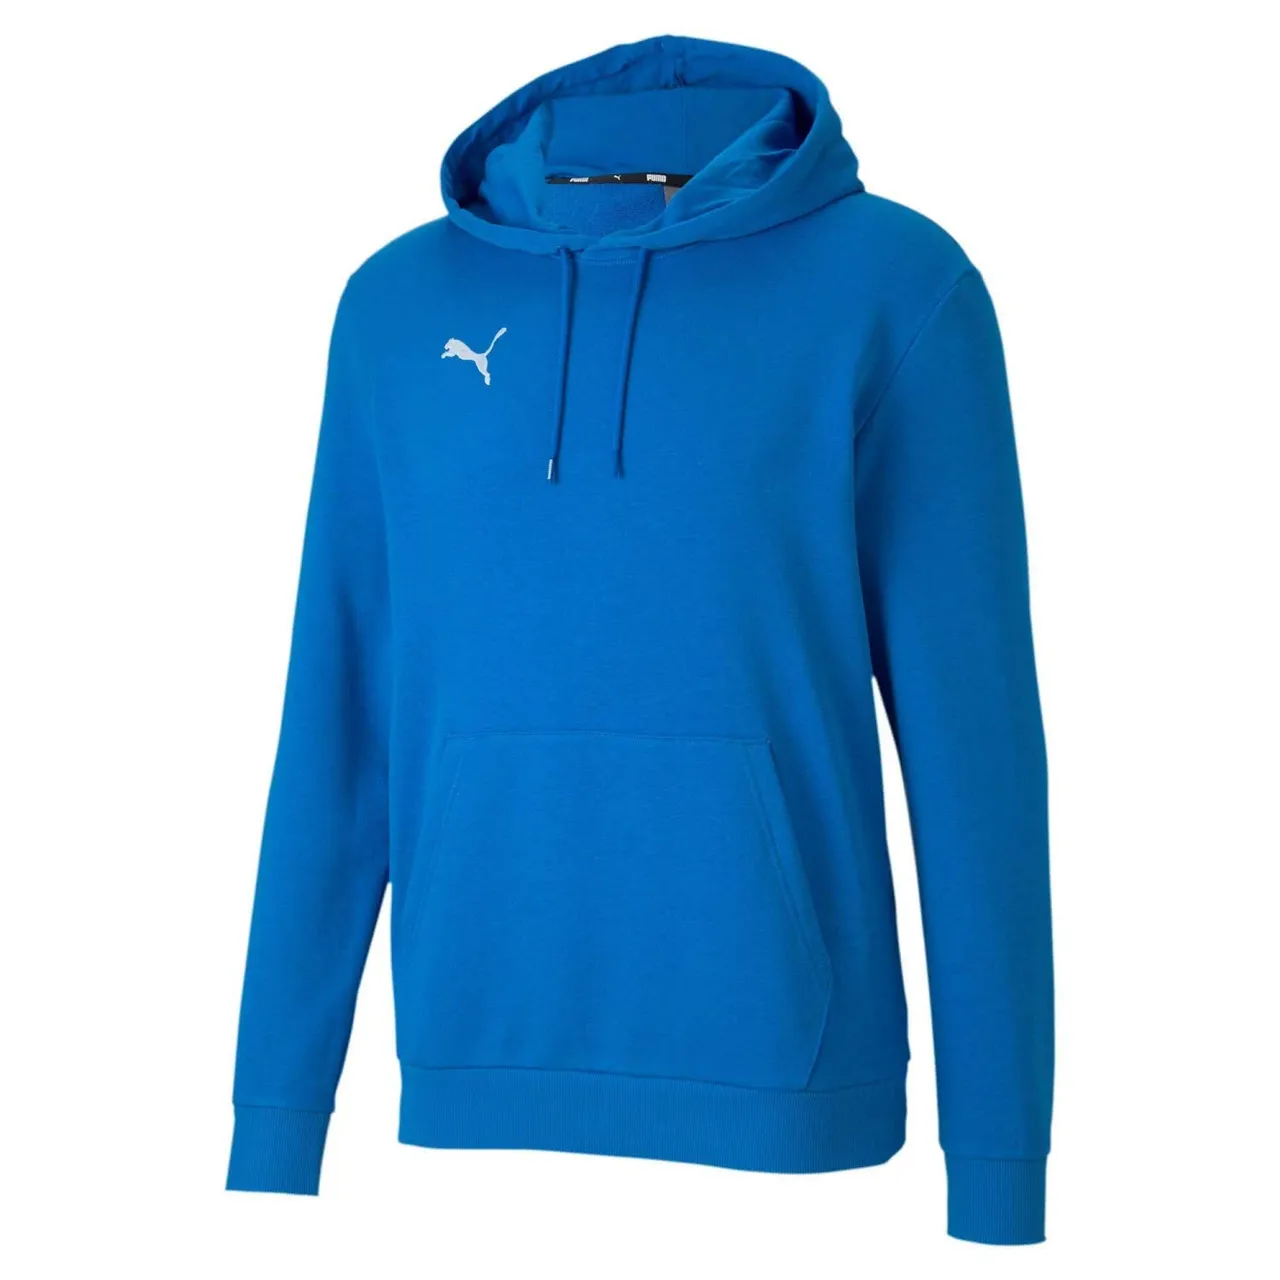 PUMA Team Goal 23 Causals Hoody Pullover - Electric Blue